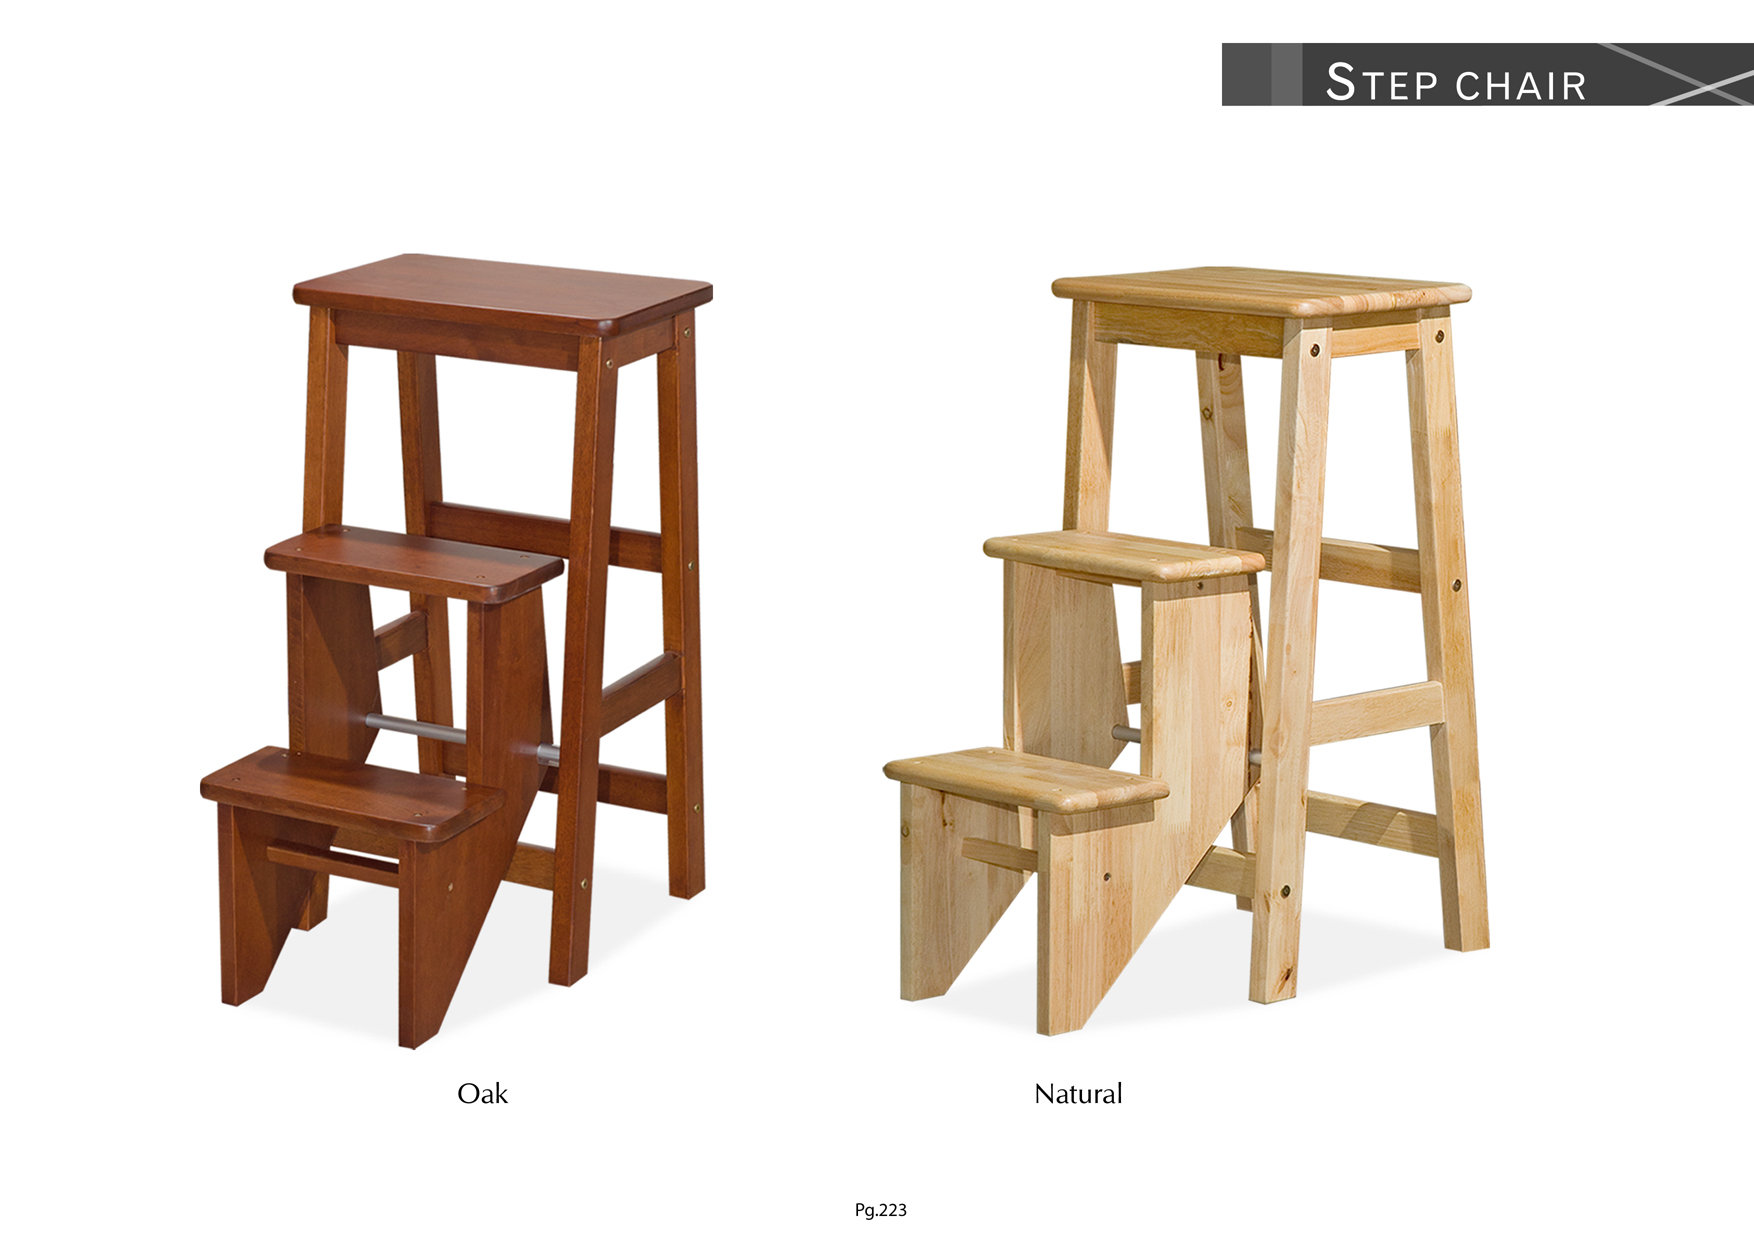 Product: PG223. STEP CHAIR